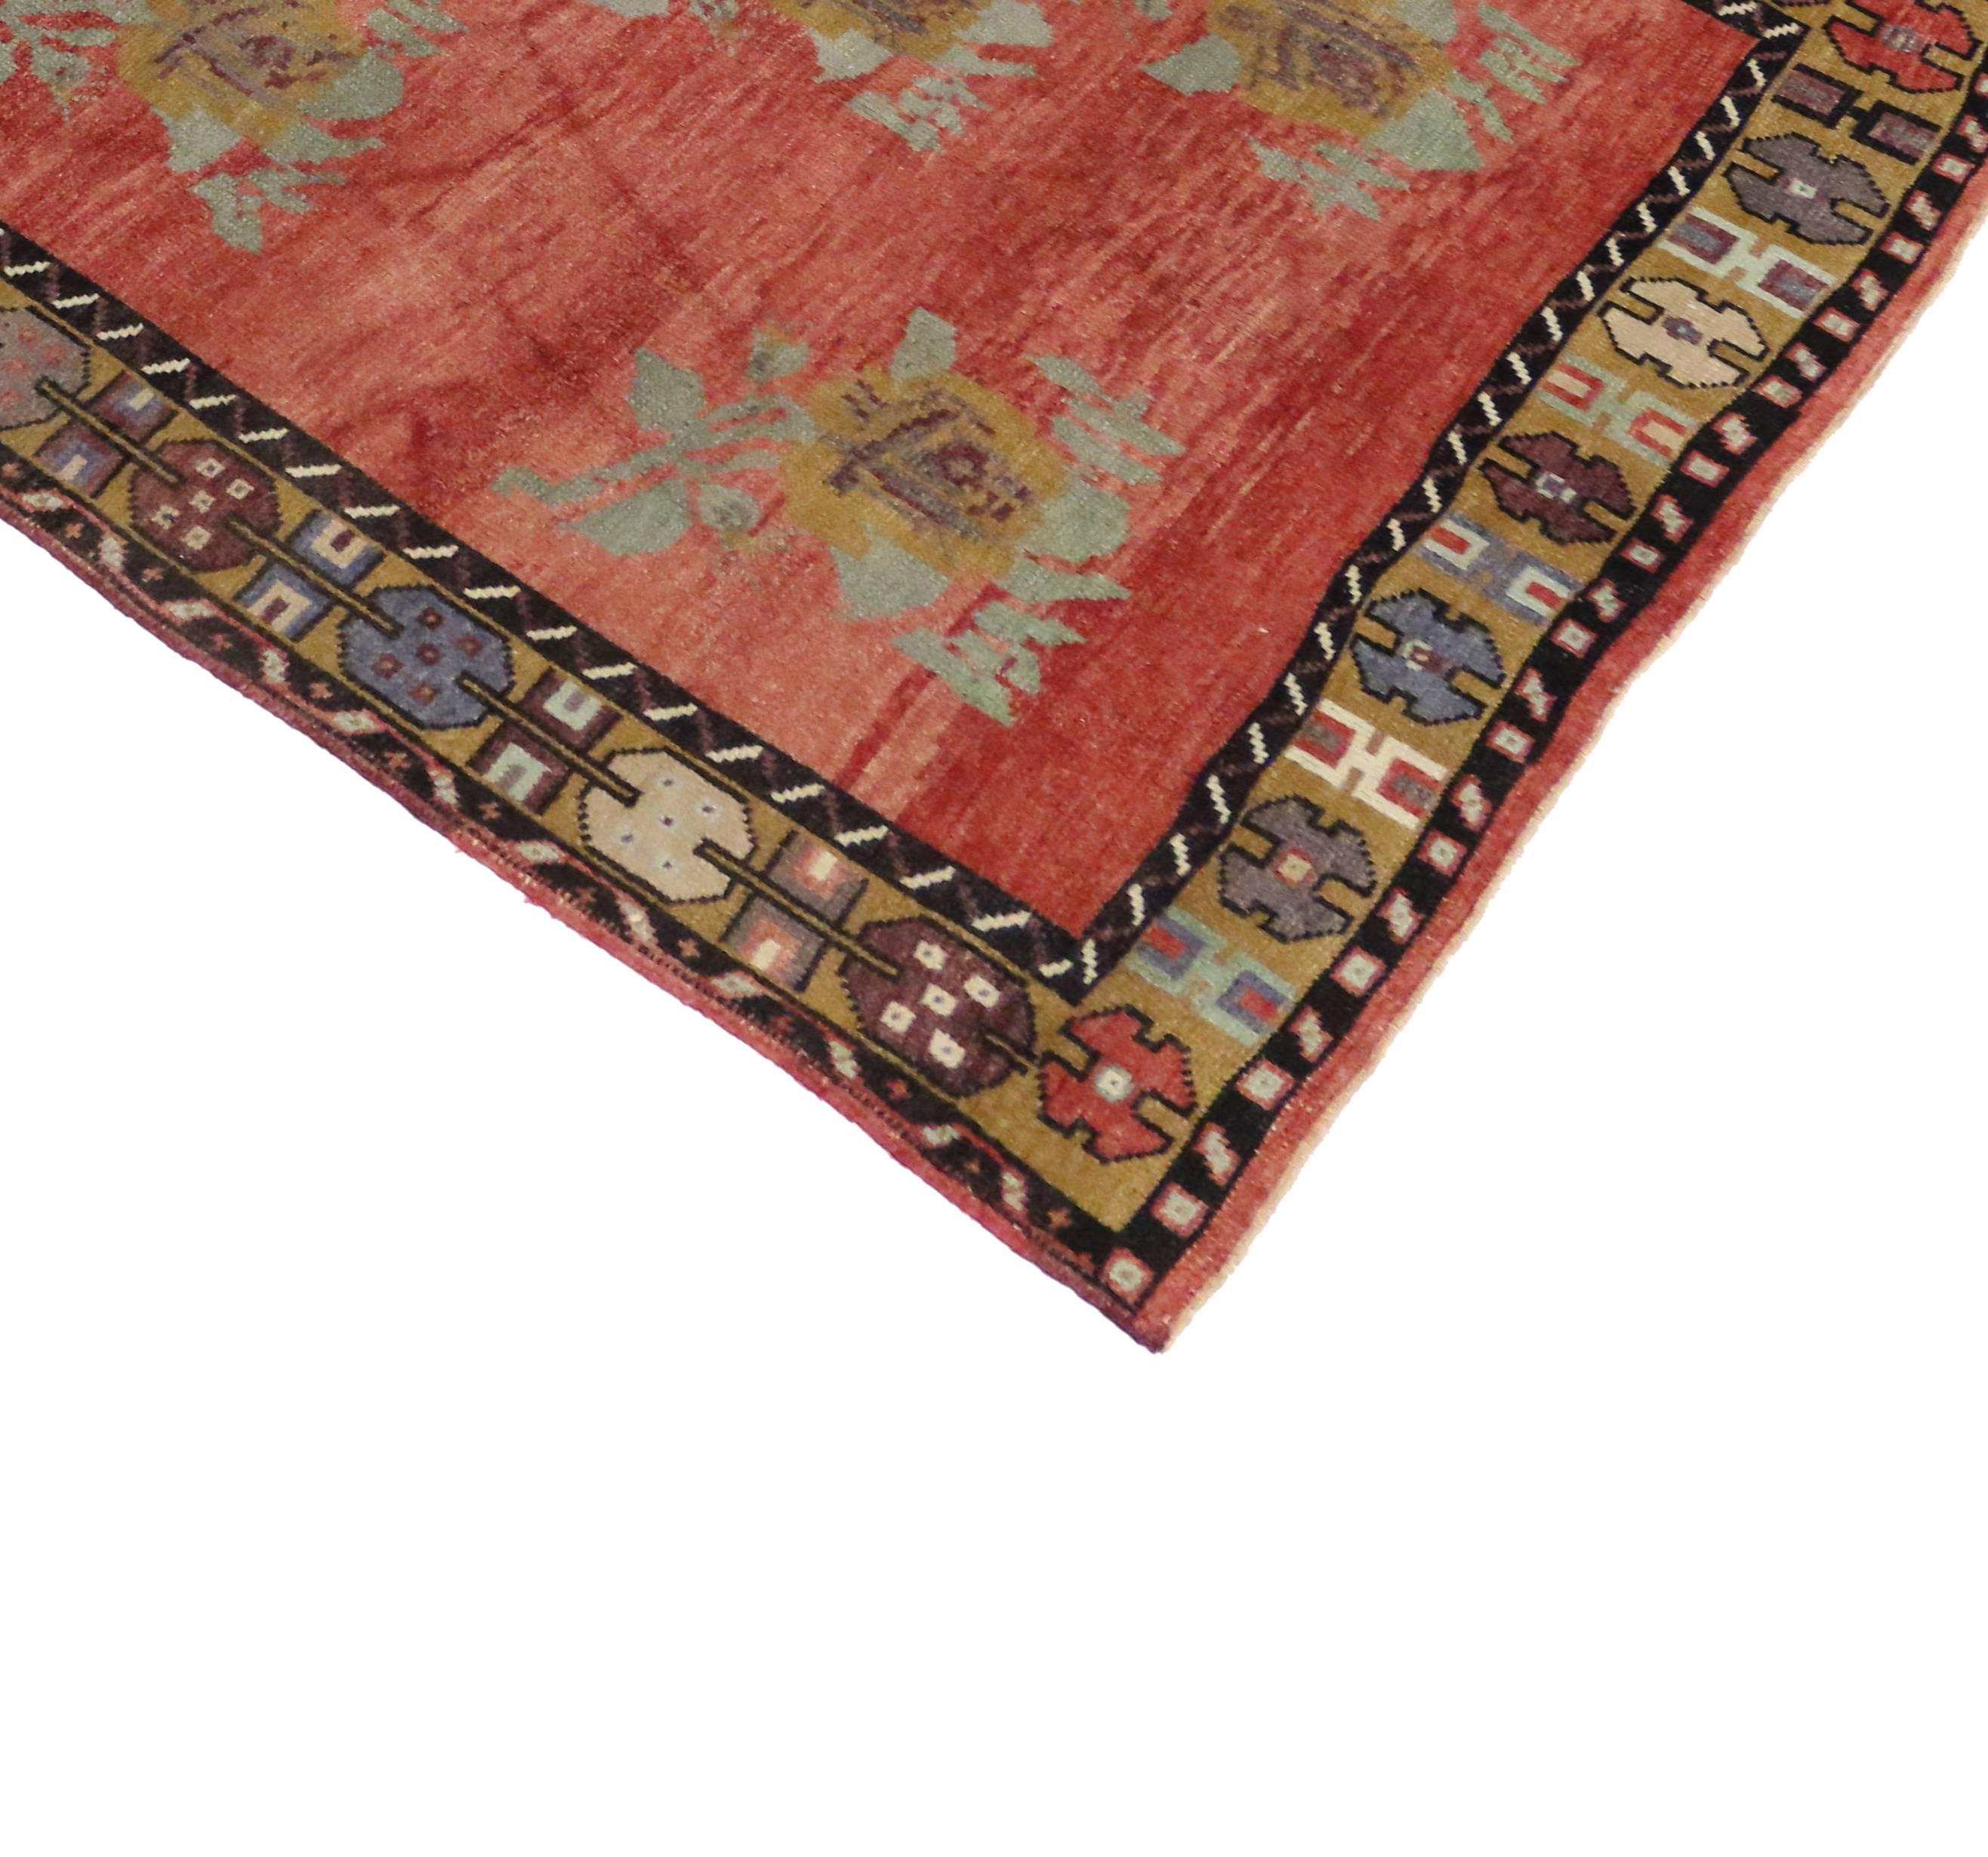 51362 Vintage Turkish Oushak Hallway Runner with English Country Cottage Style. Boasting a floral bounty in a range of warm hues, this hand-knotted wool vintage Turkish Oushak runner is a delightful example of English Country Cottage style. The